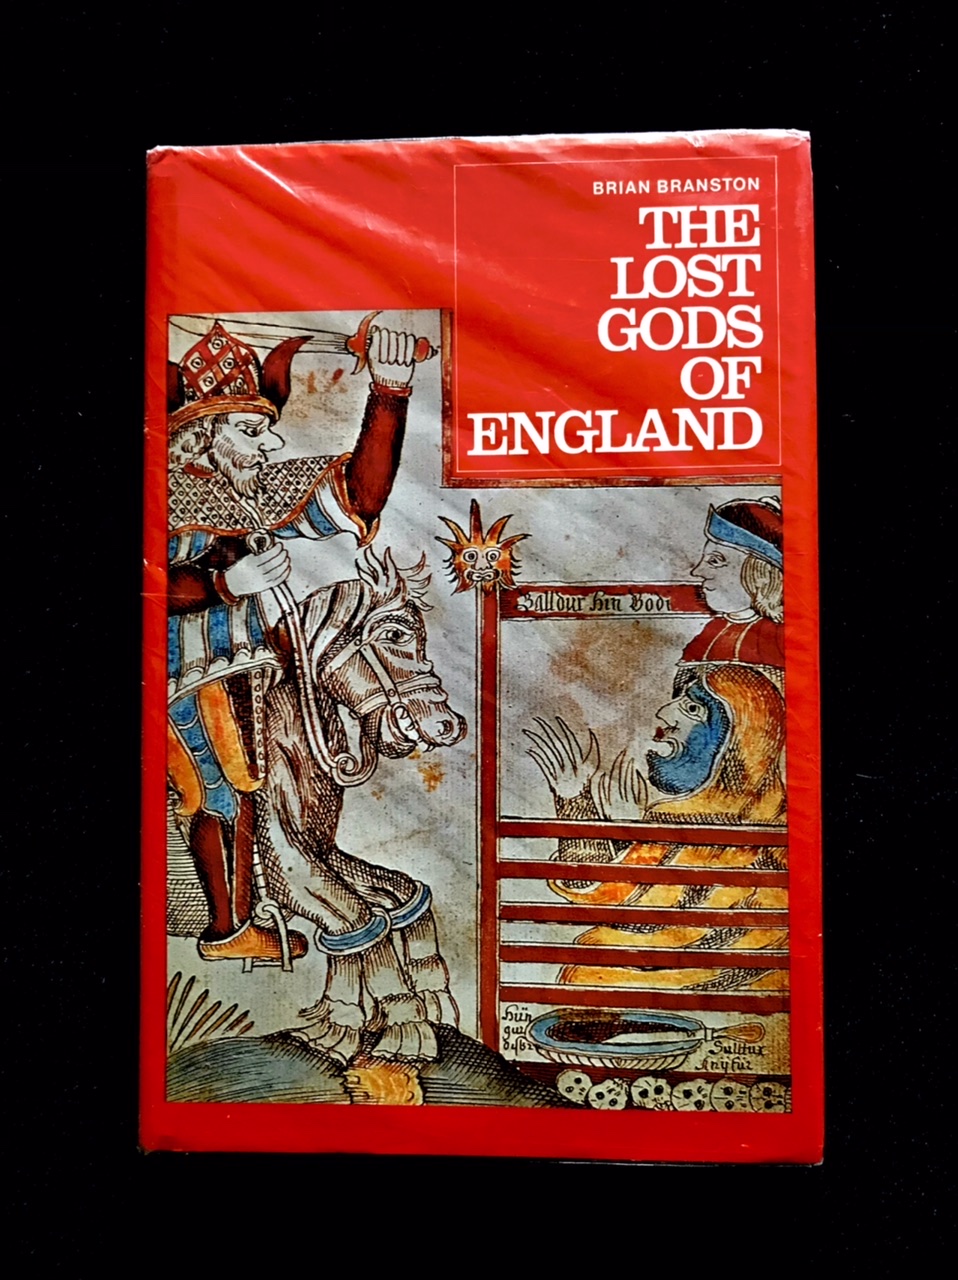 The Lost Gods of England by Brian Branston